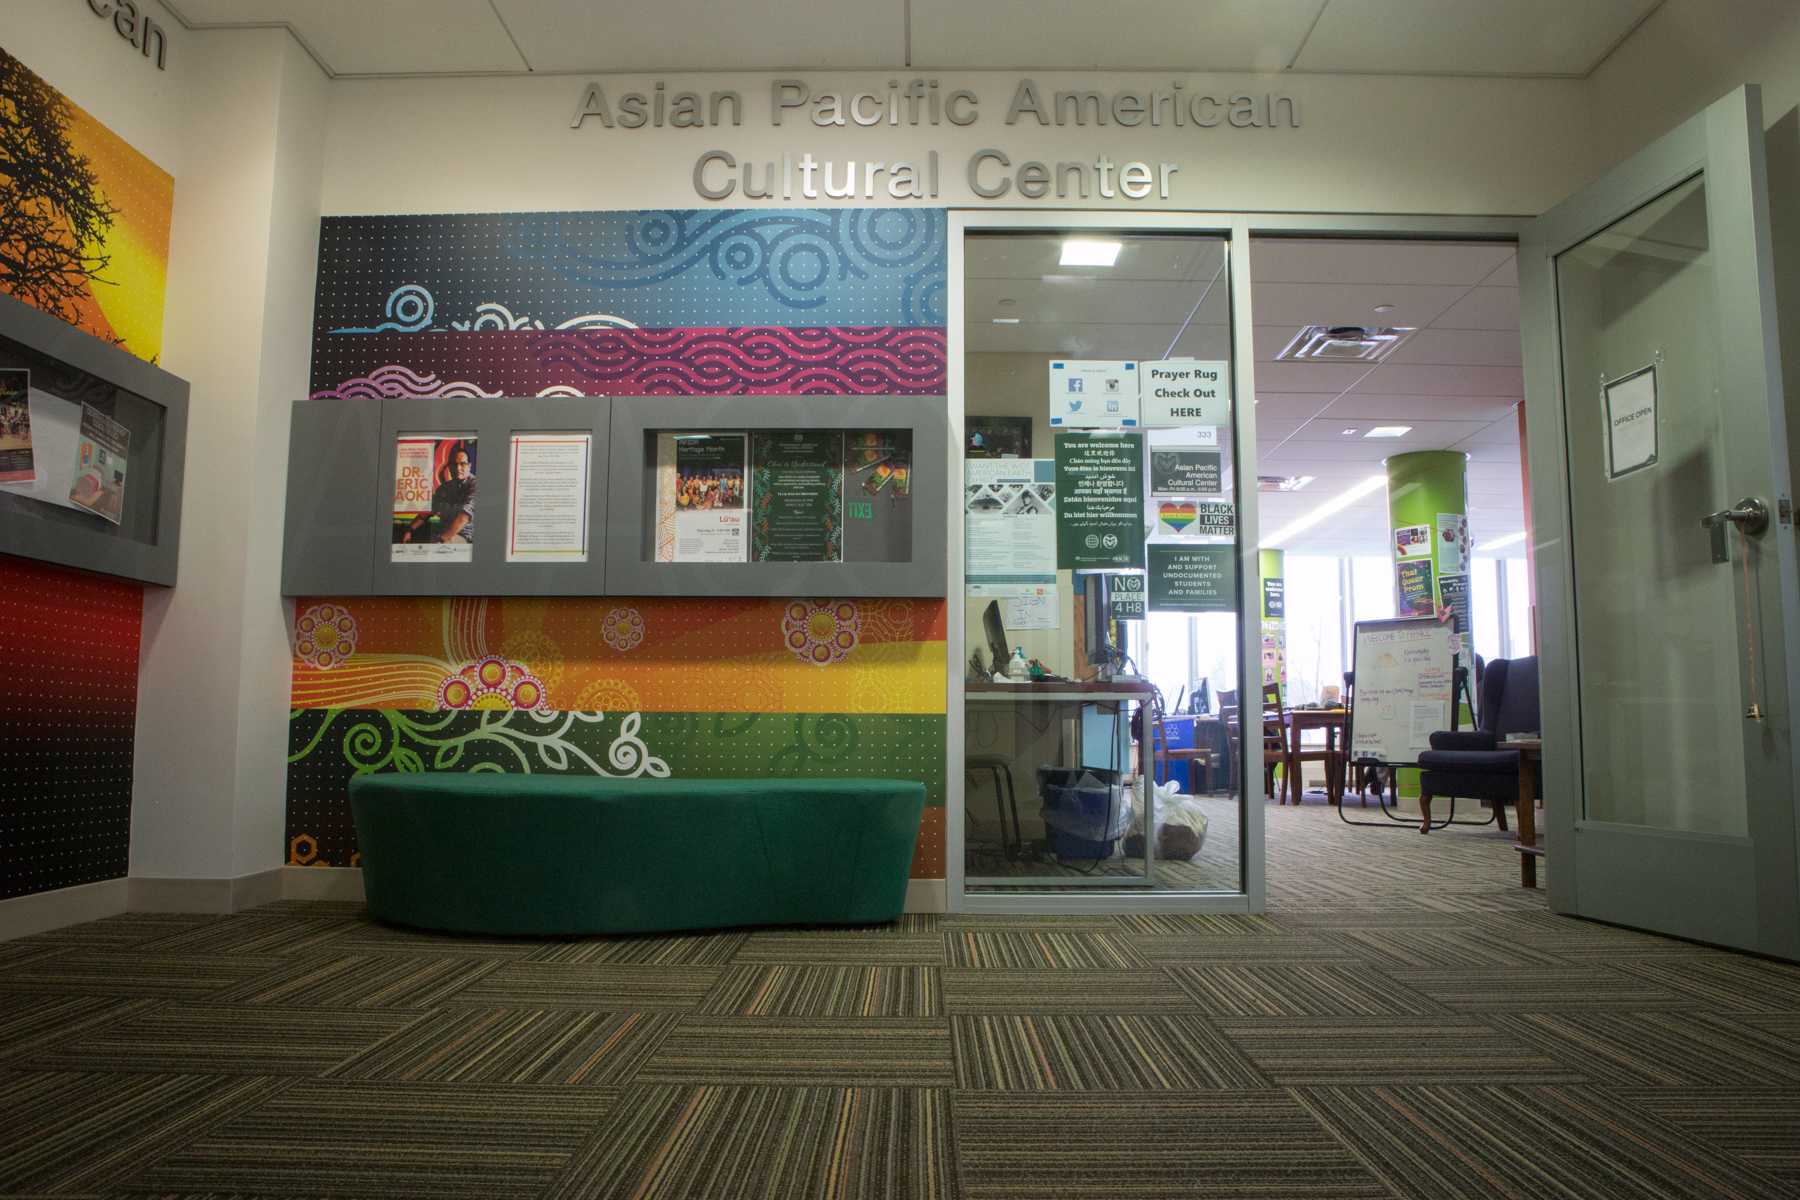 The Asian Pacific American Cultural Center Office